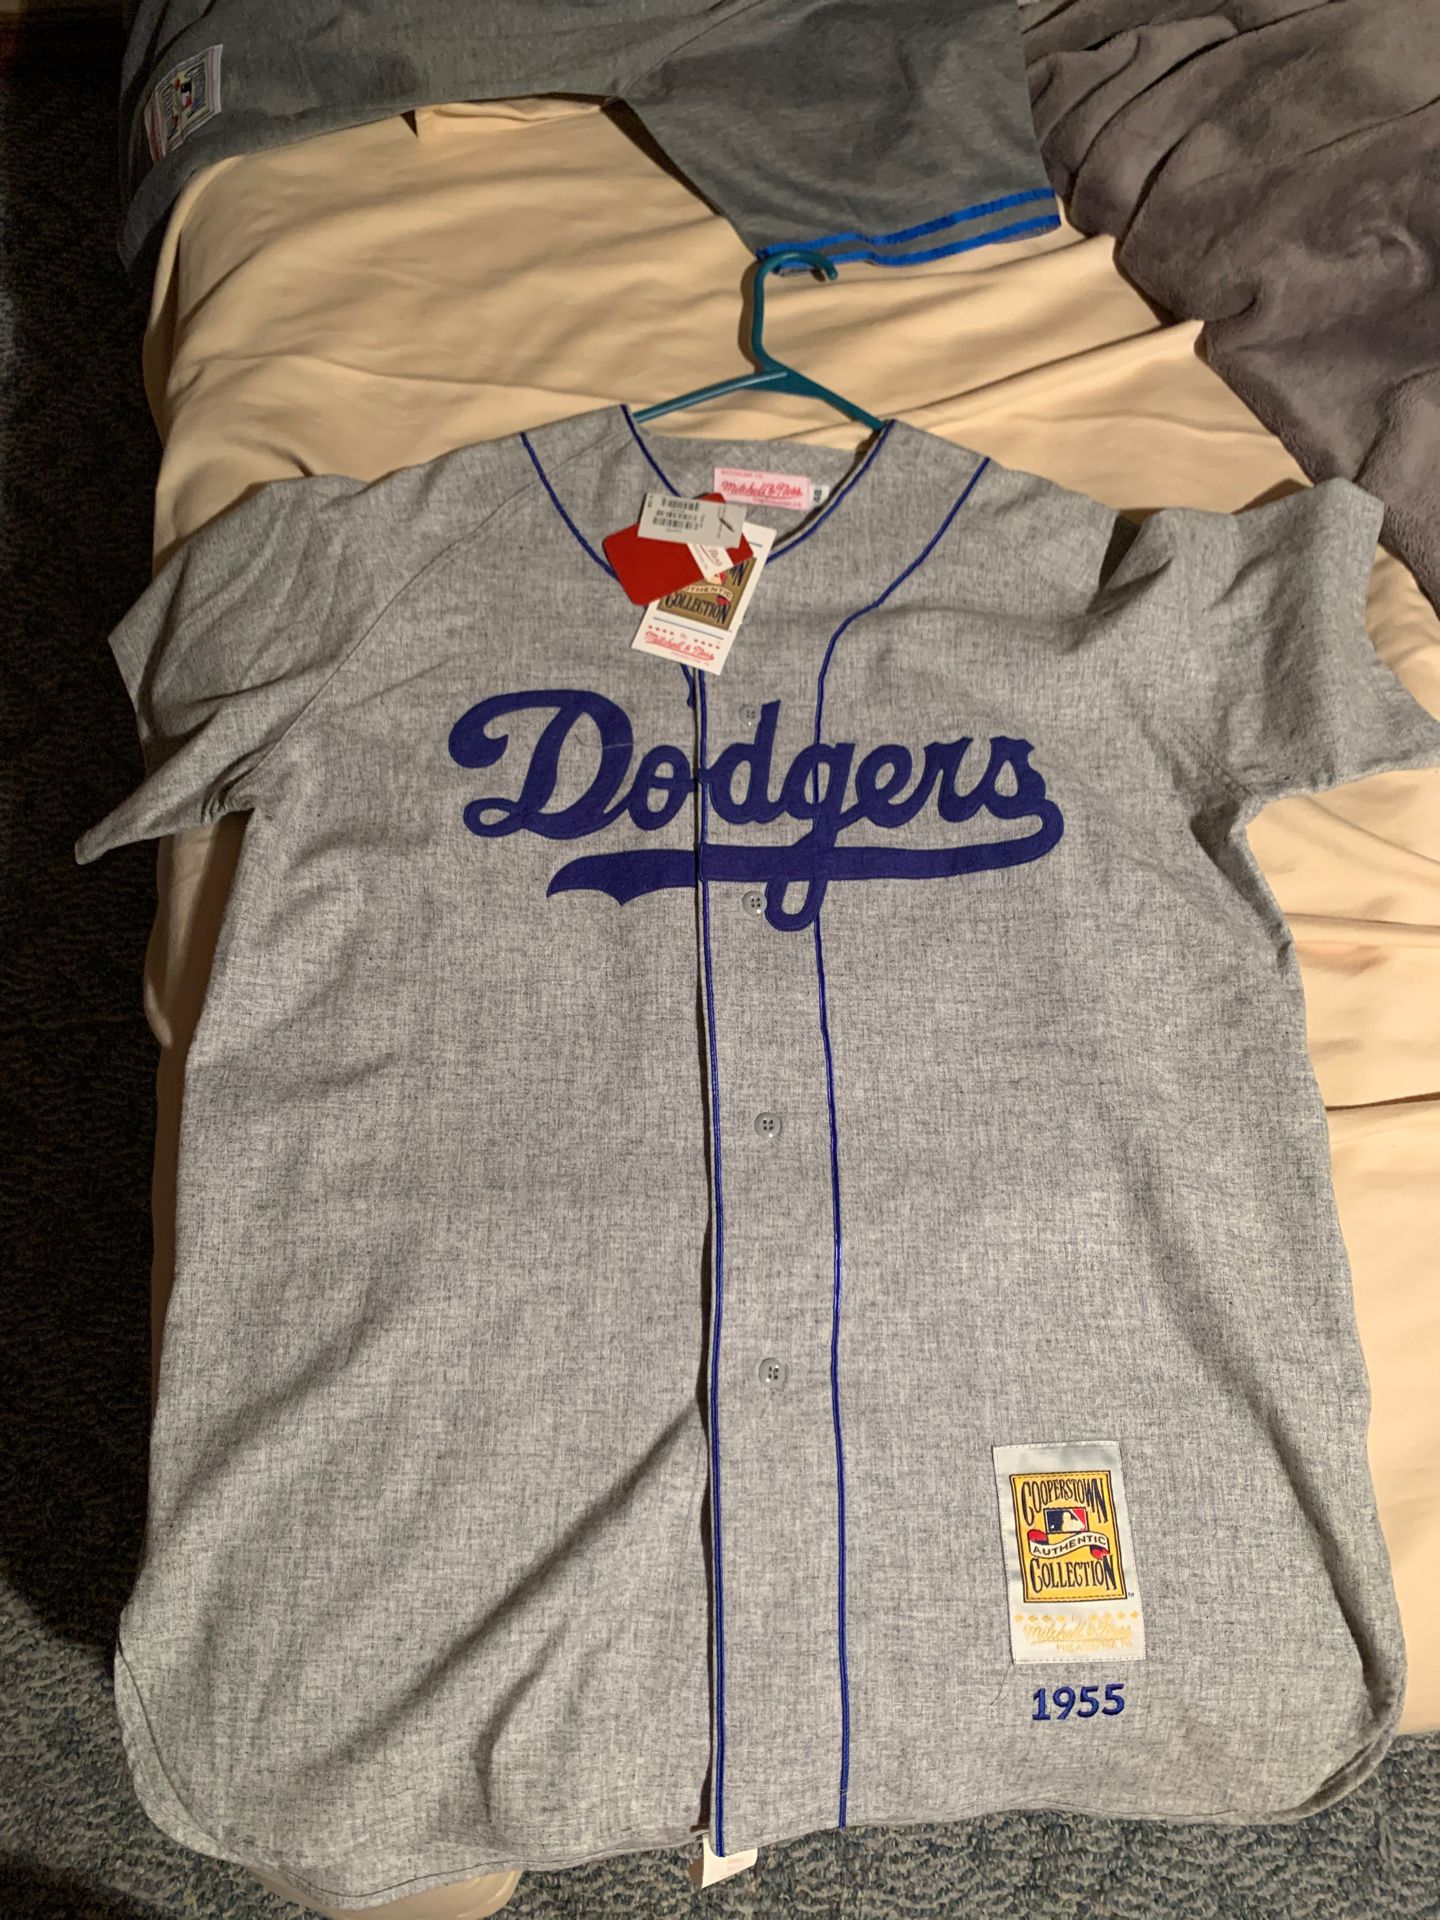 Brooklyn Dodgers Duke Snyder Mitchell and Ness Jersey NWT